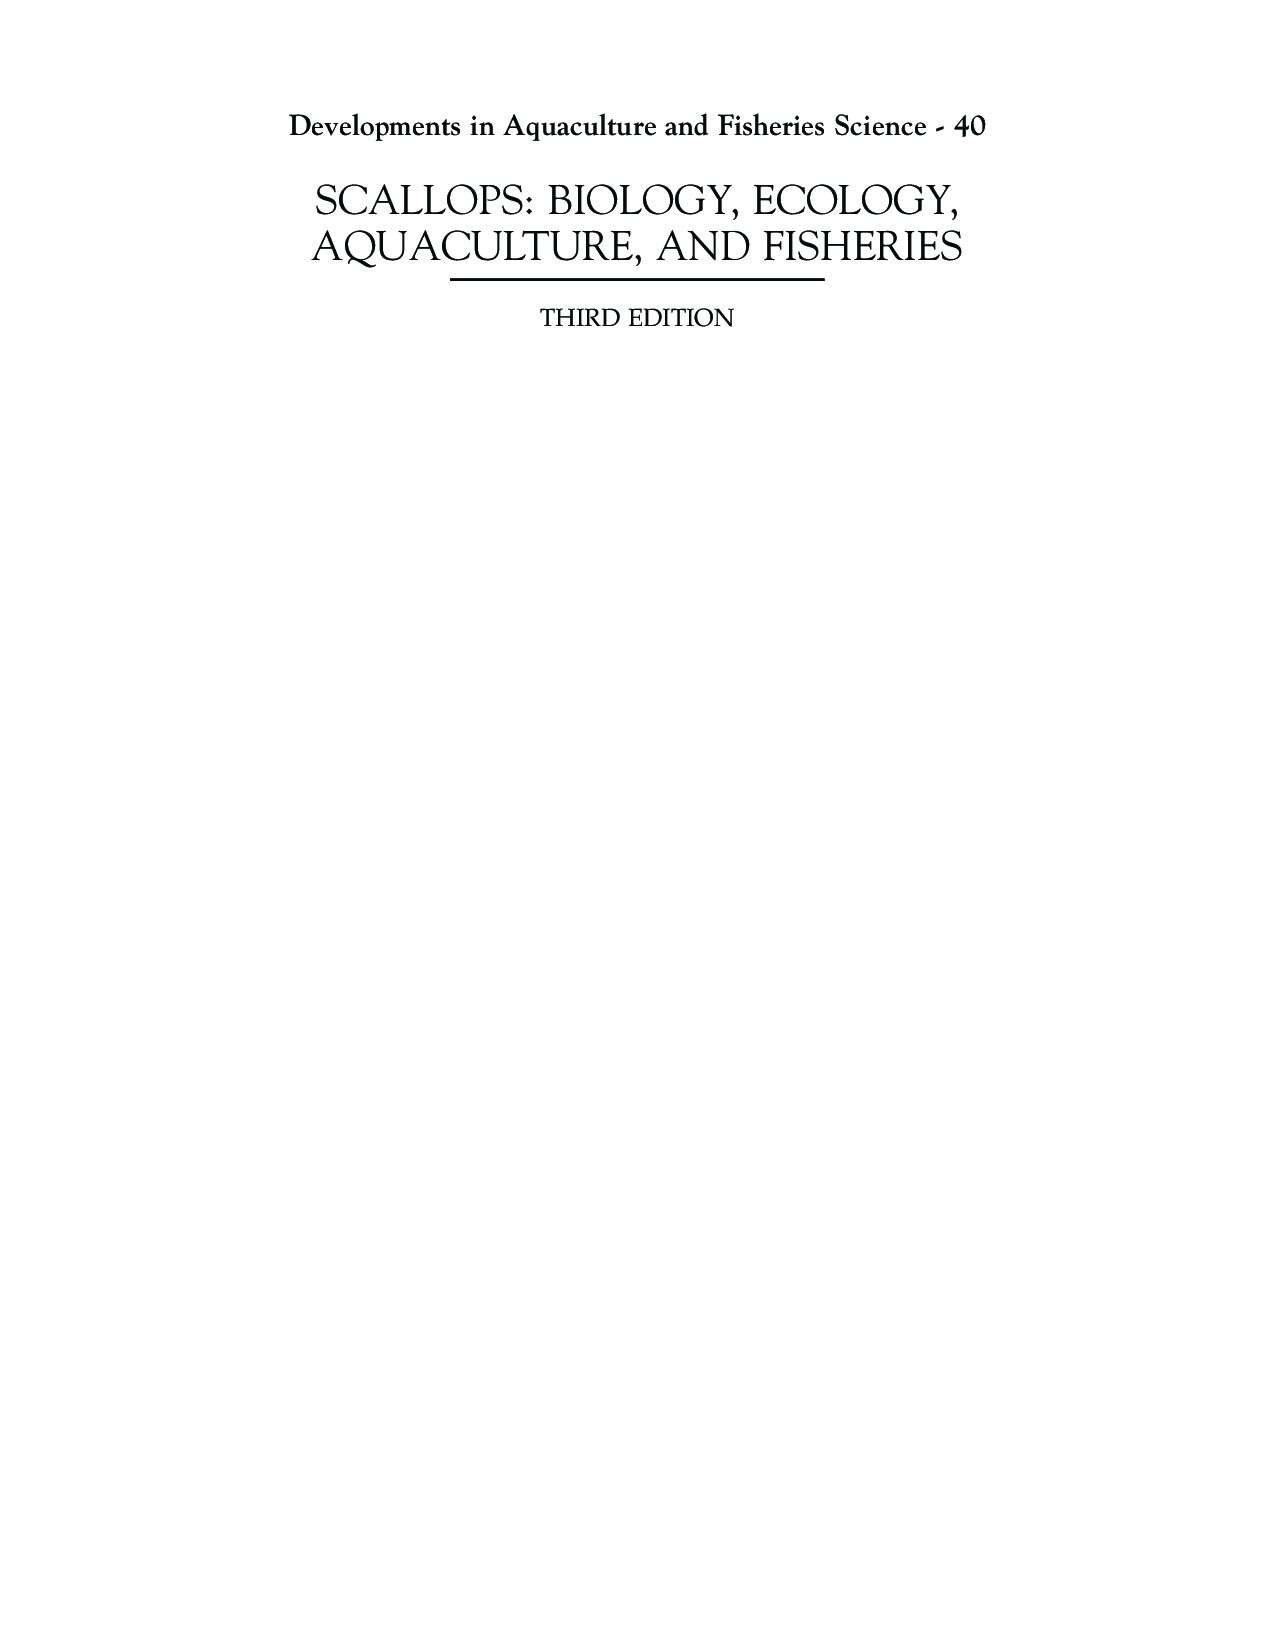 Scallops Biology, Ecology, Aquaculture, and Fisheries-Elsevier Science (2016)